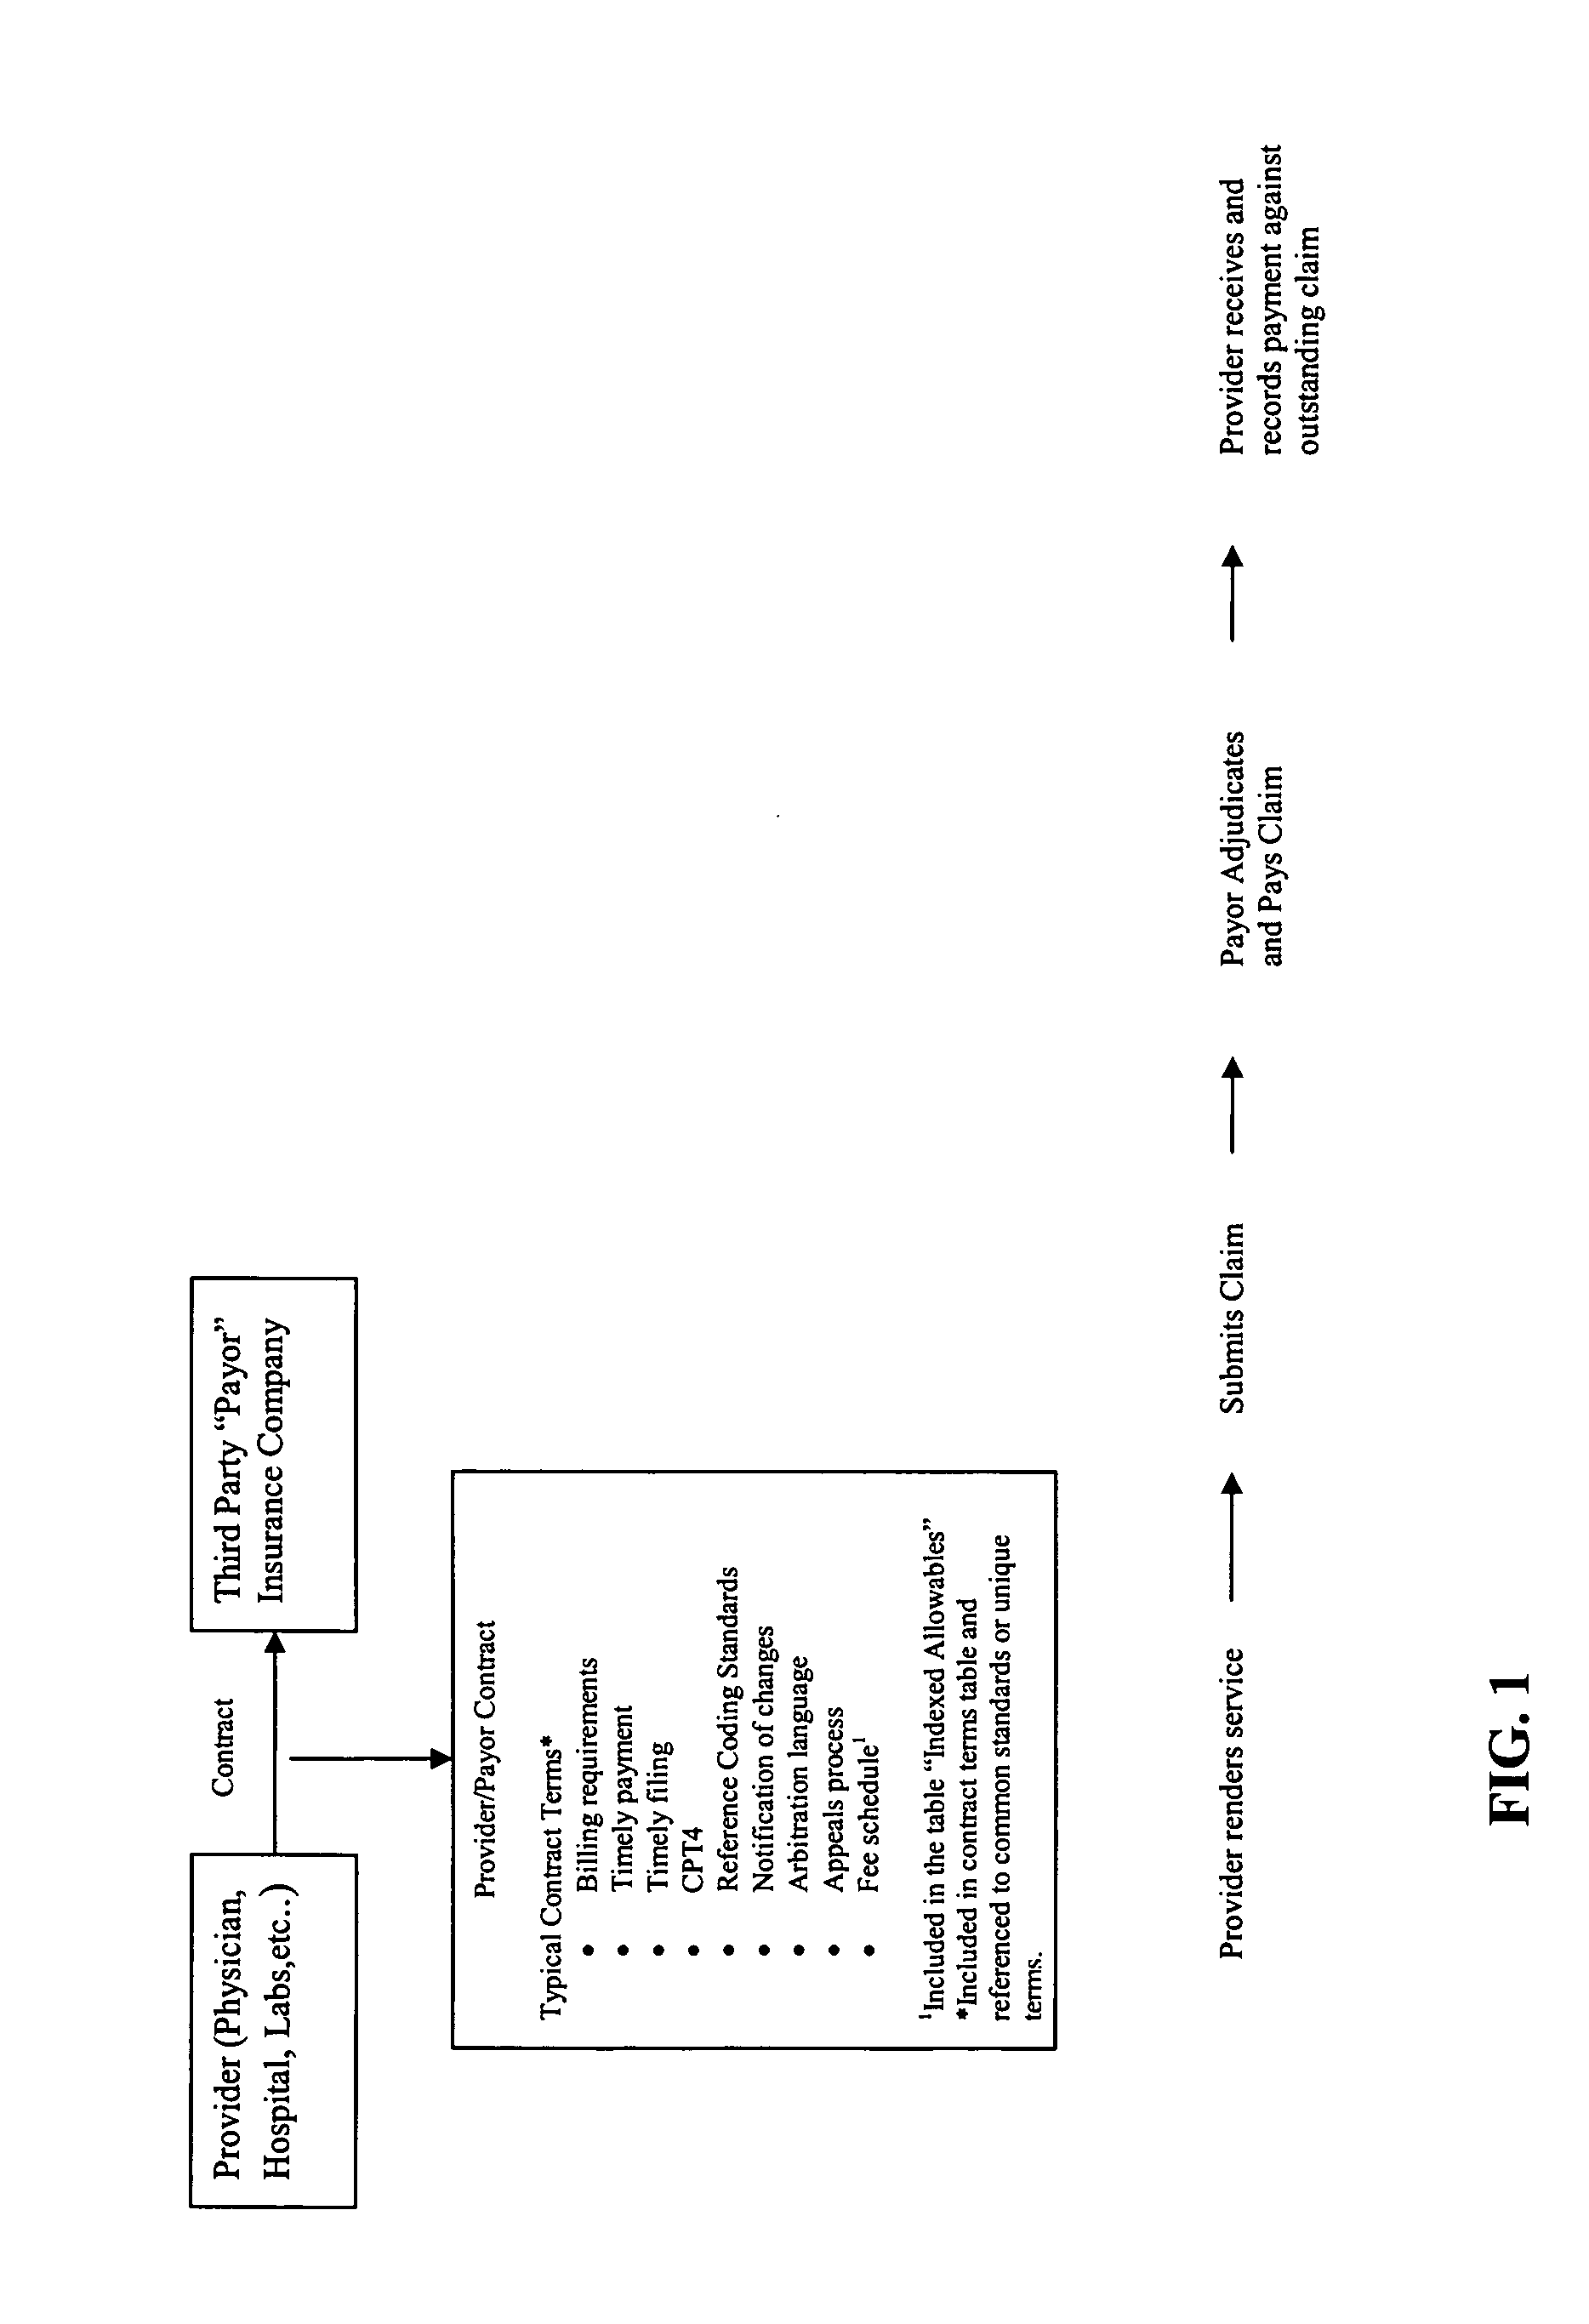 Method and apparatus for detecting the erroneous processing and adjudication of health care claims